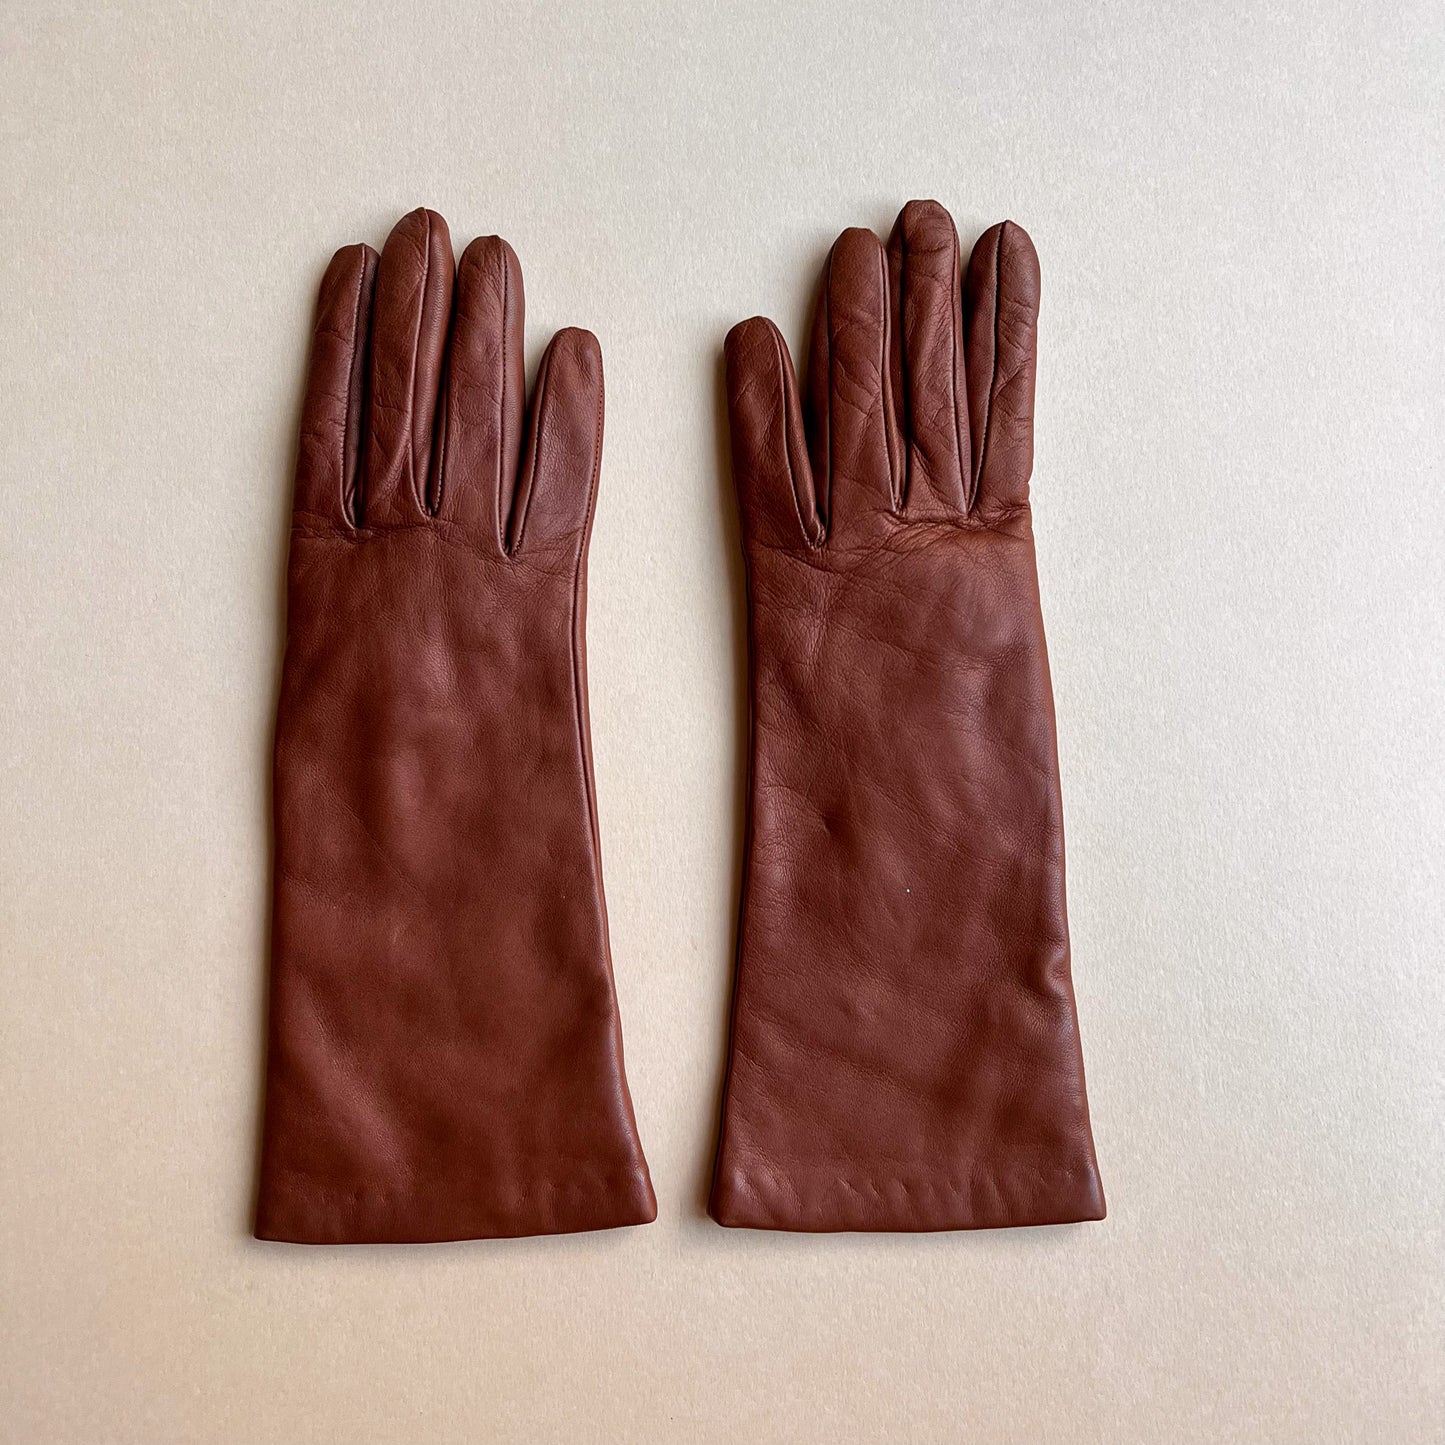 1980s Super Soft Brown Leather Gloves (7)